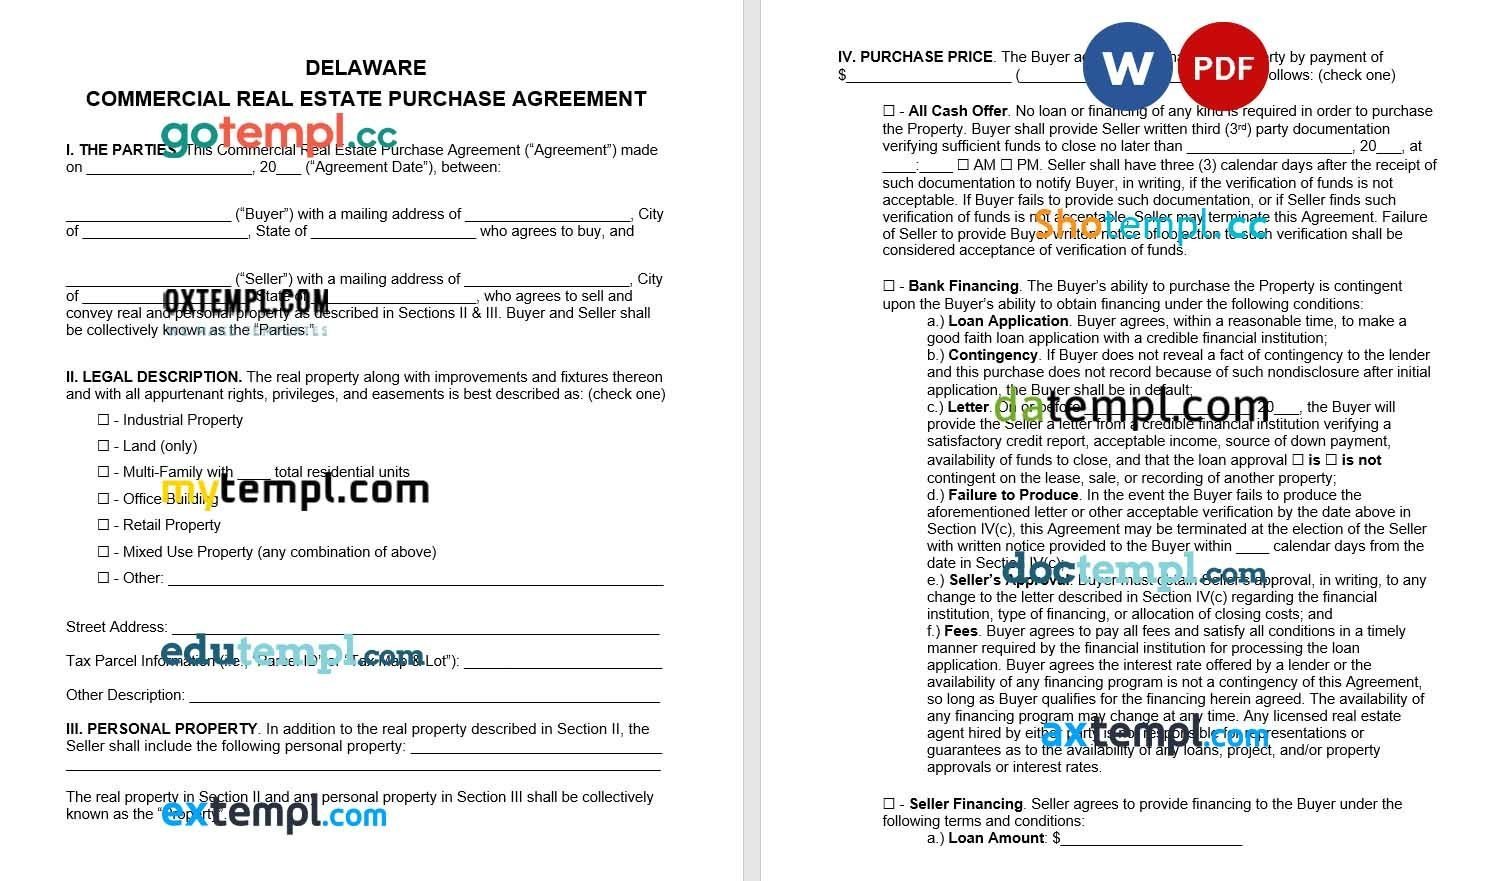 Delaware Commercial Real Estate Purchase Agreement Word example